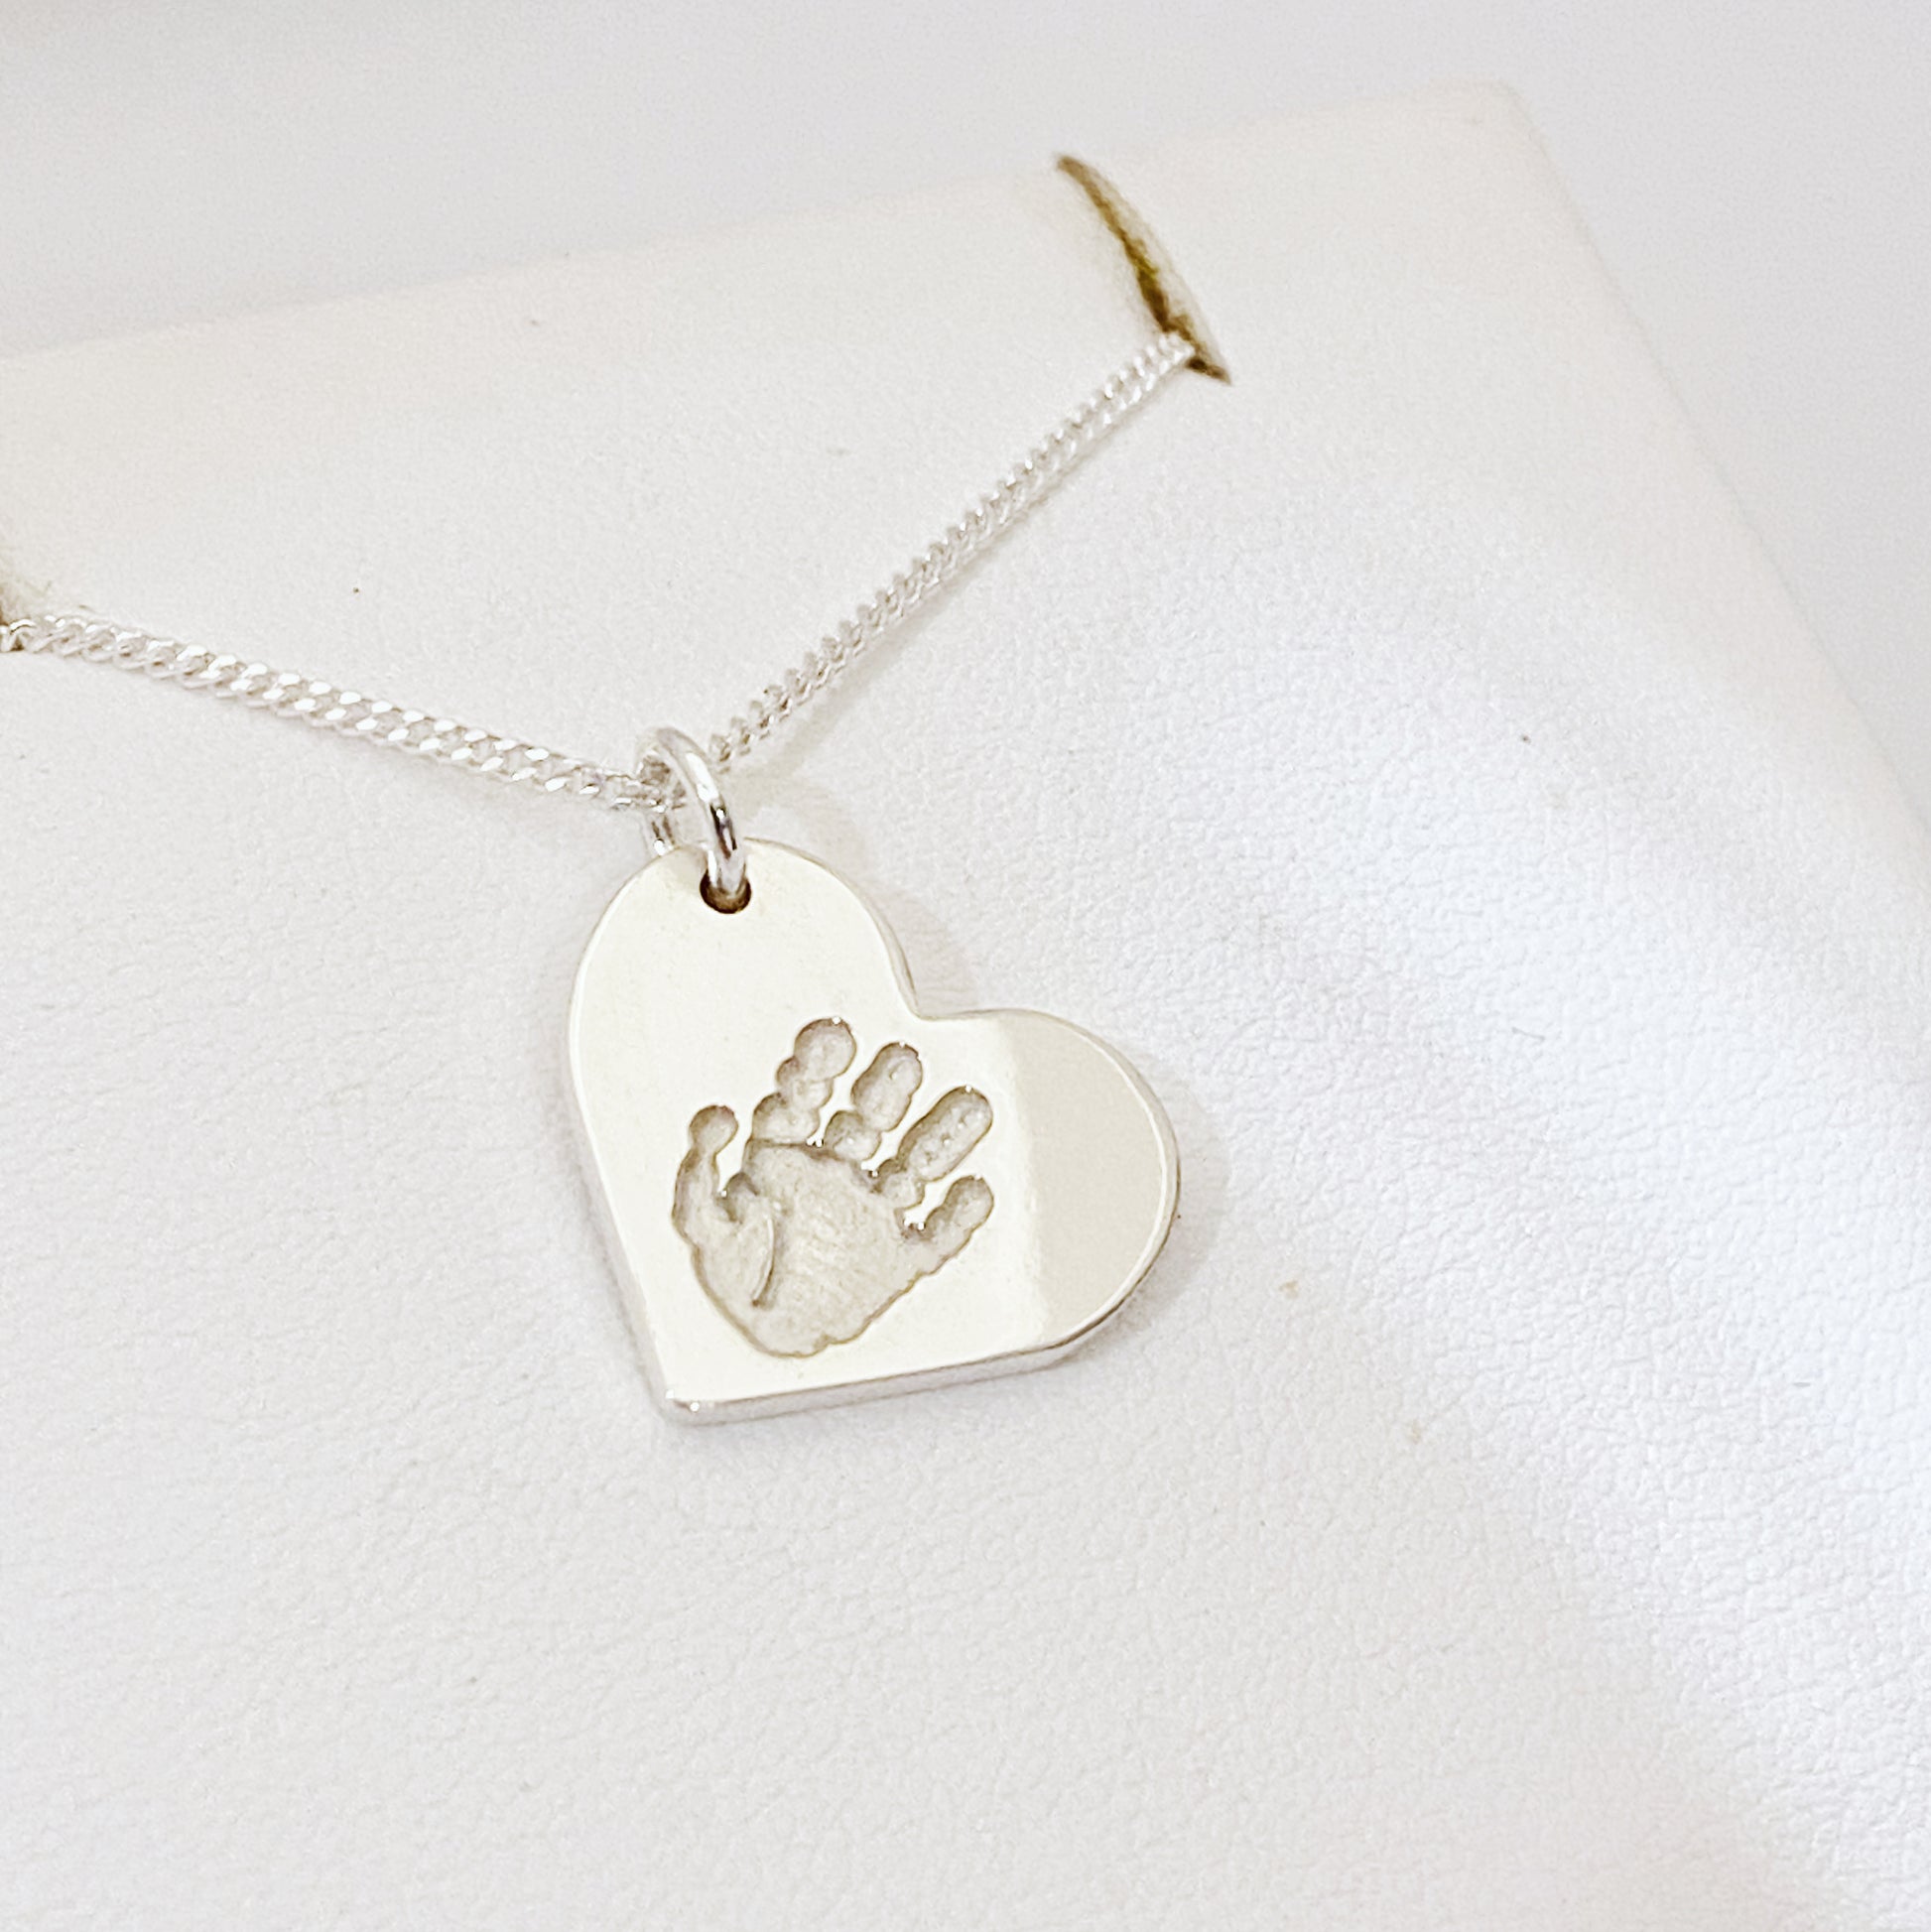 Small modern handprint Jewellery, use your babies, pet or loved ones hand or footprint. Made in New Zealand from sterling Silver